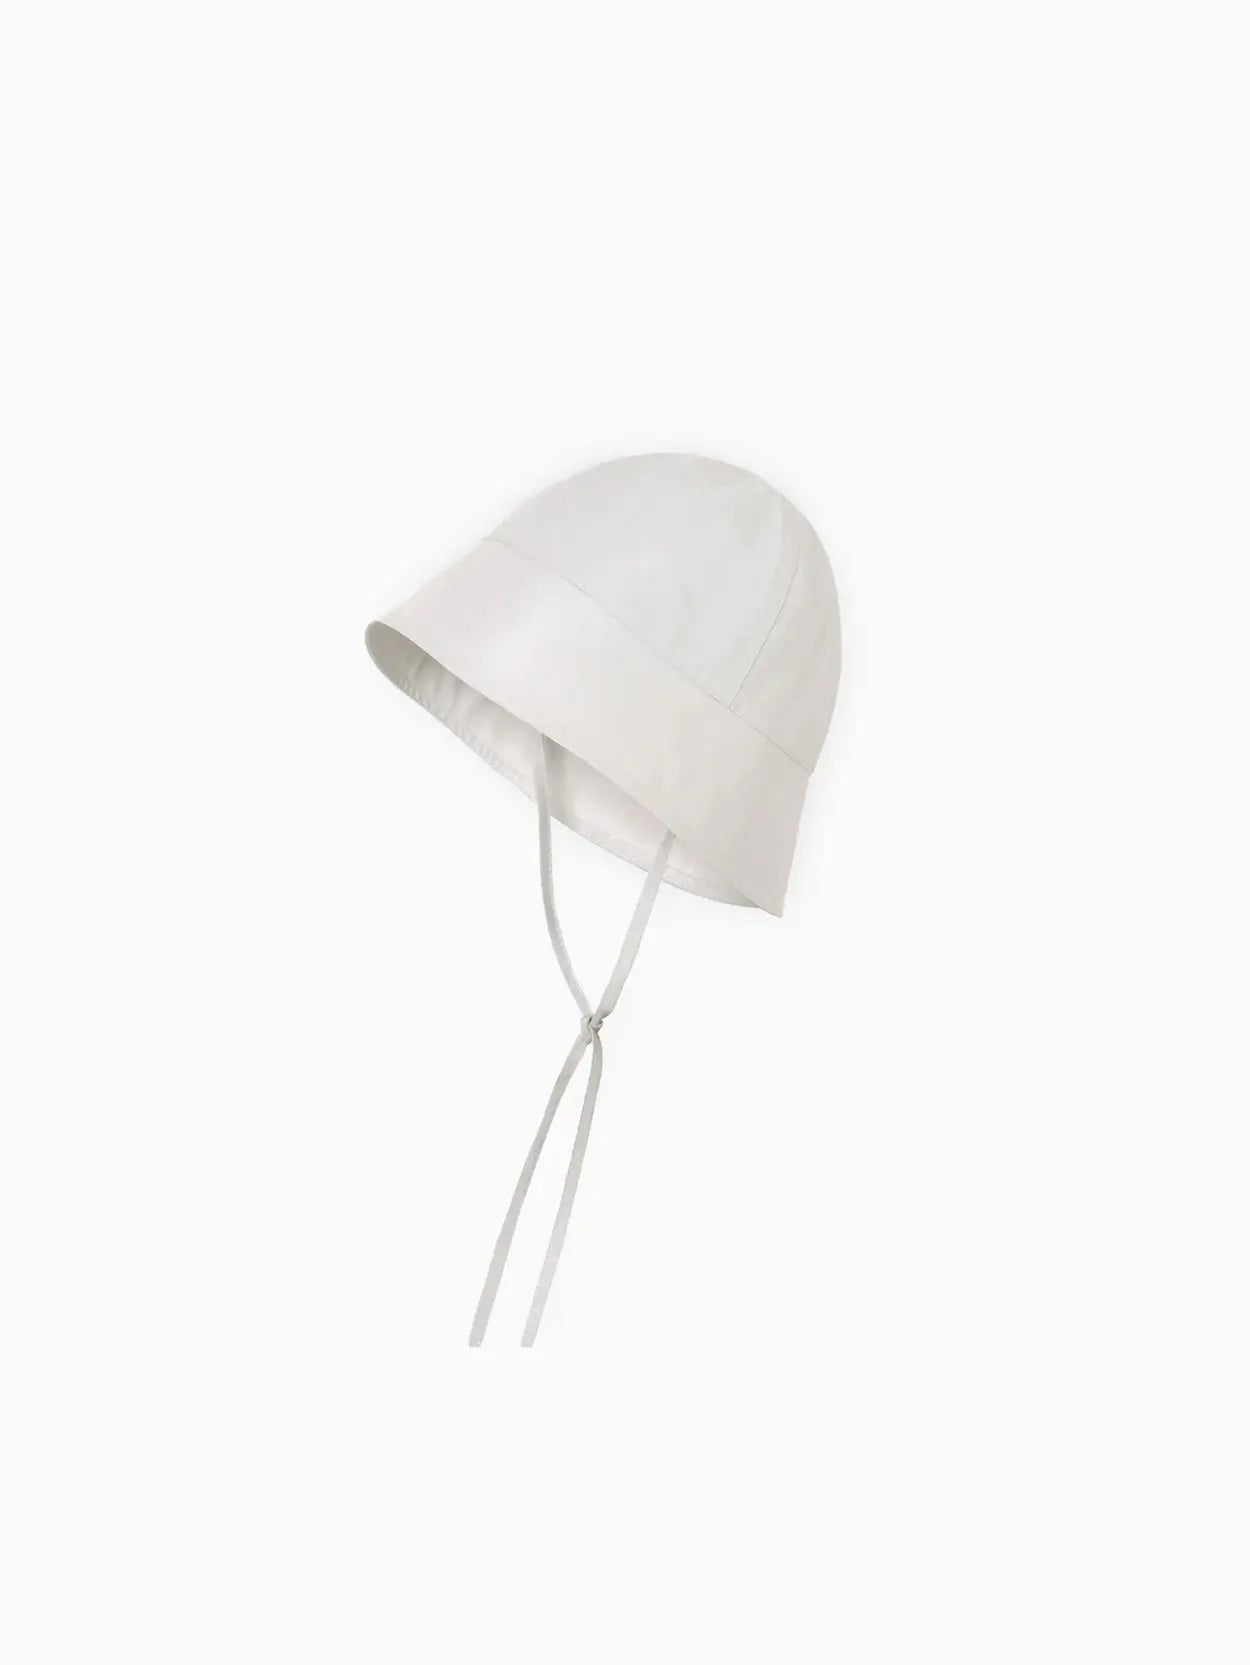 A Kasa Hat Ice Grey with a wide brim and two adjustable chin straps, displayed on a white background, available exclusively at Bassalstore in Barcelona by Rus.